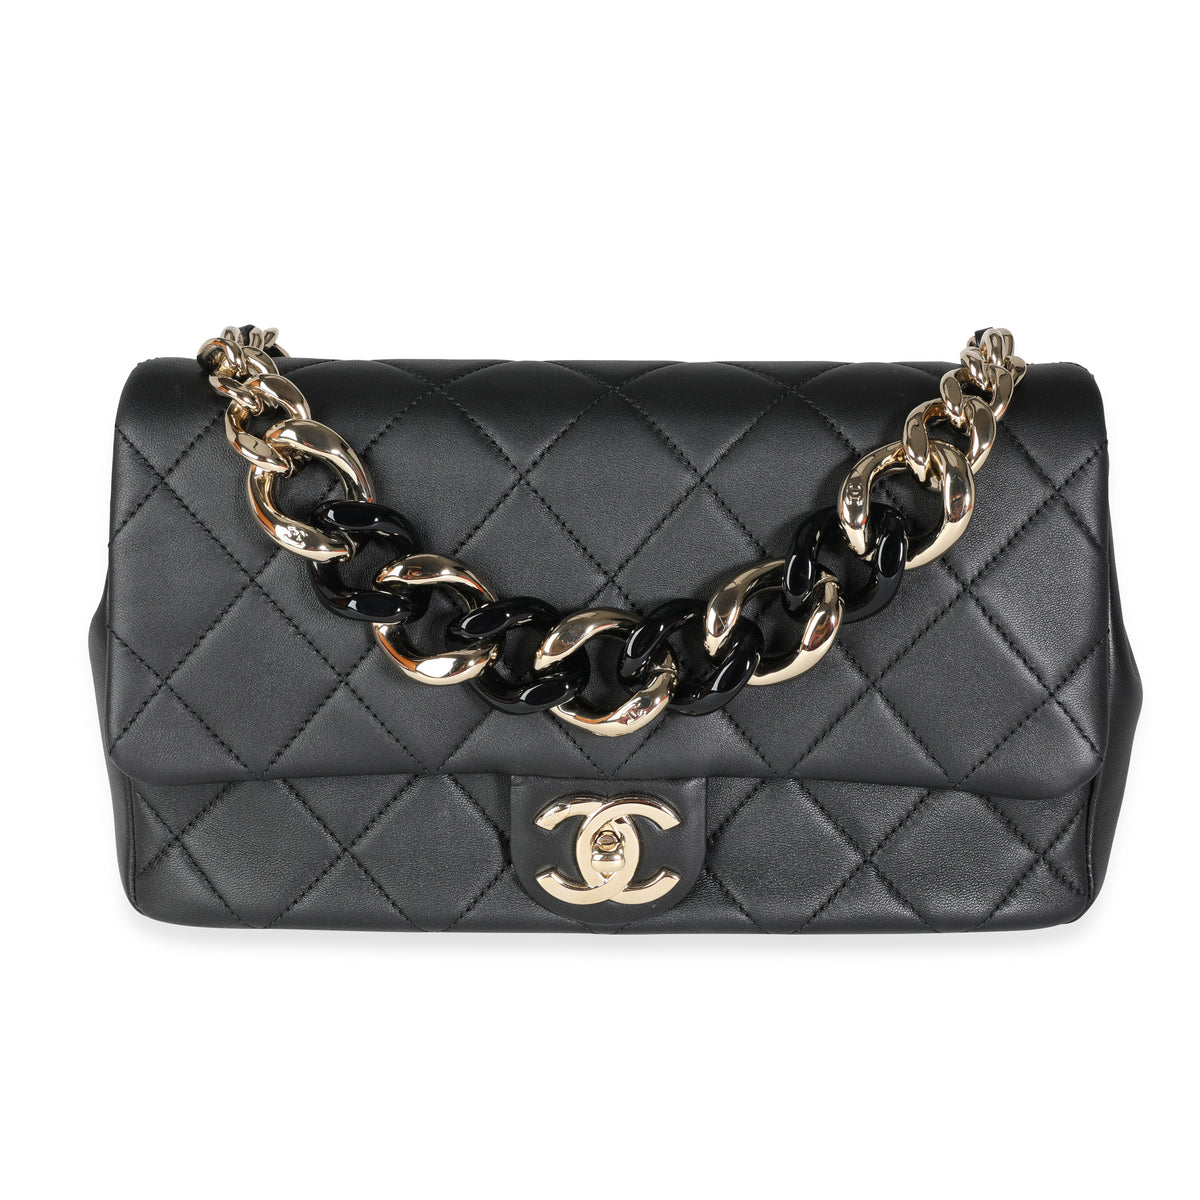 Chanel Black Quilted Lambskin Large Chain Flap Bag